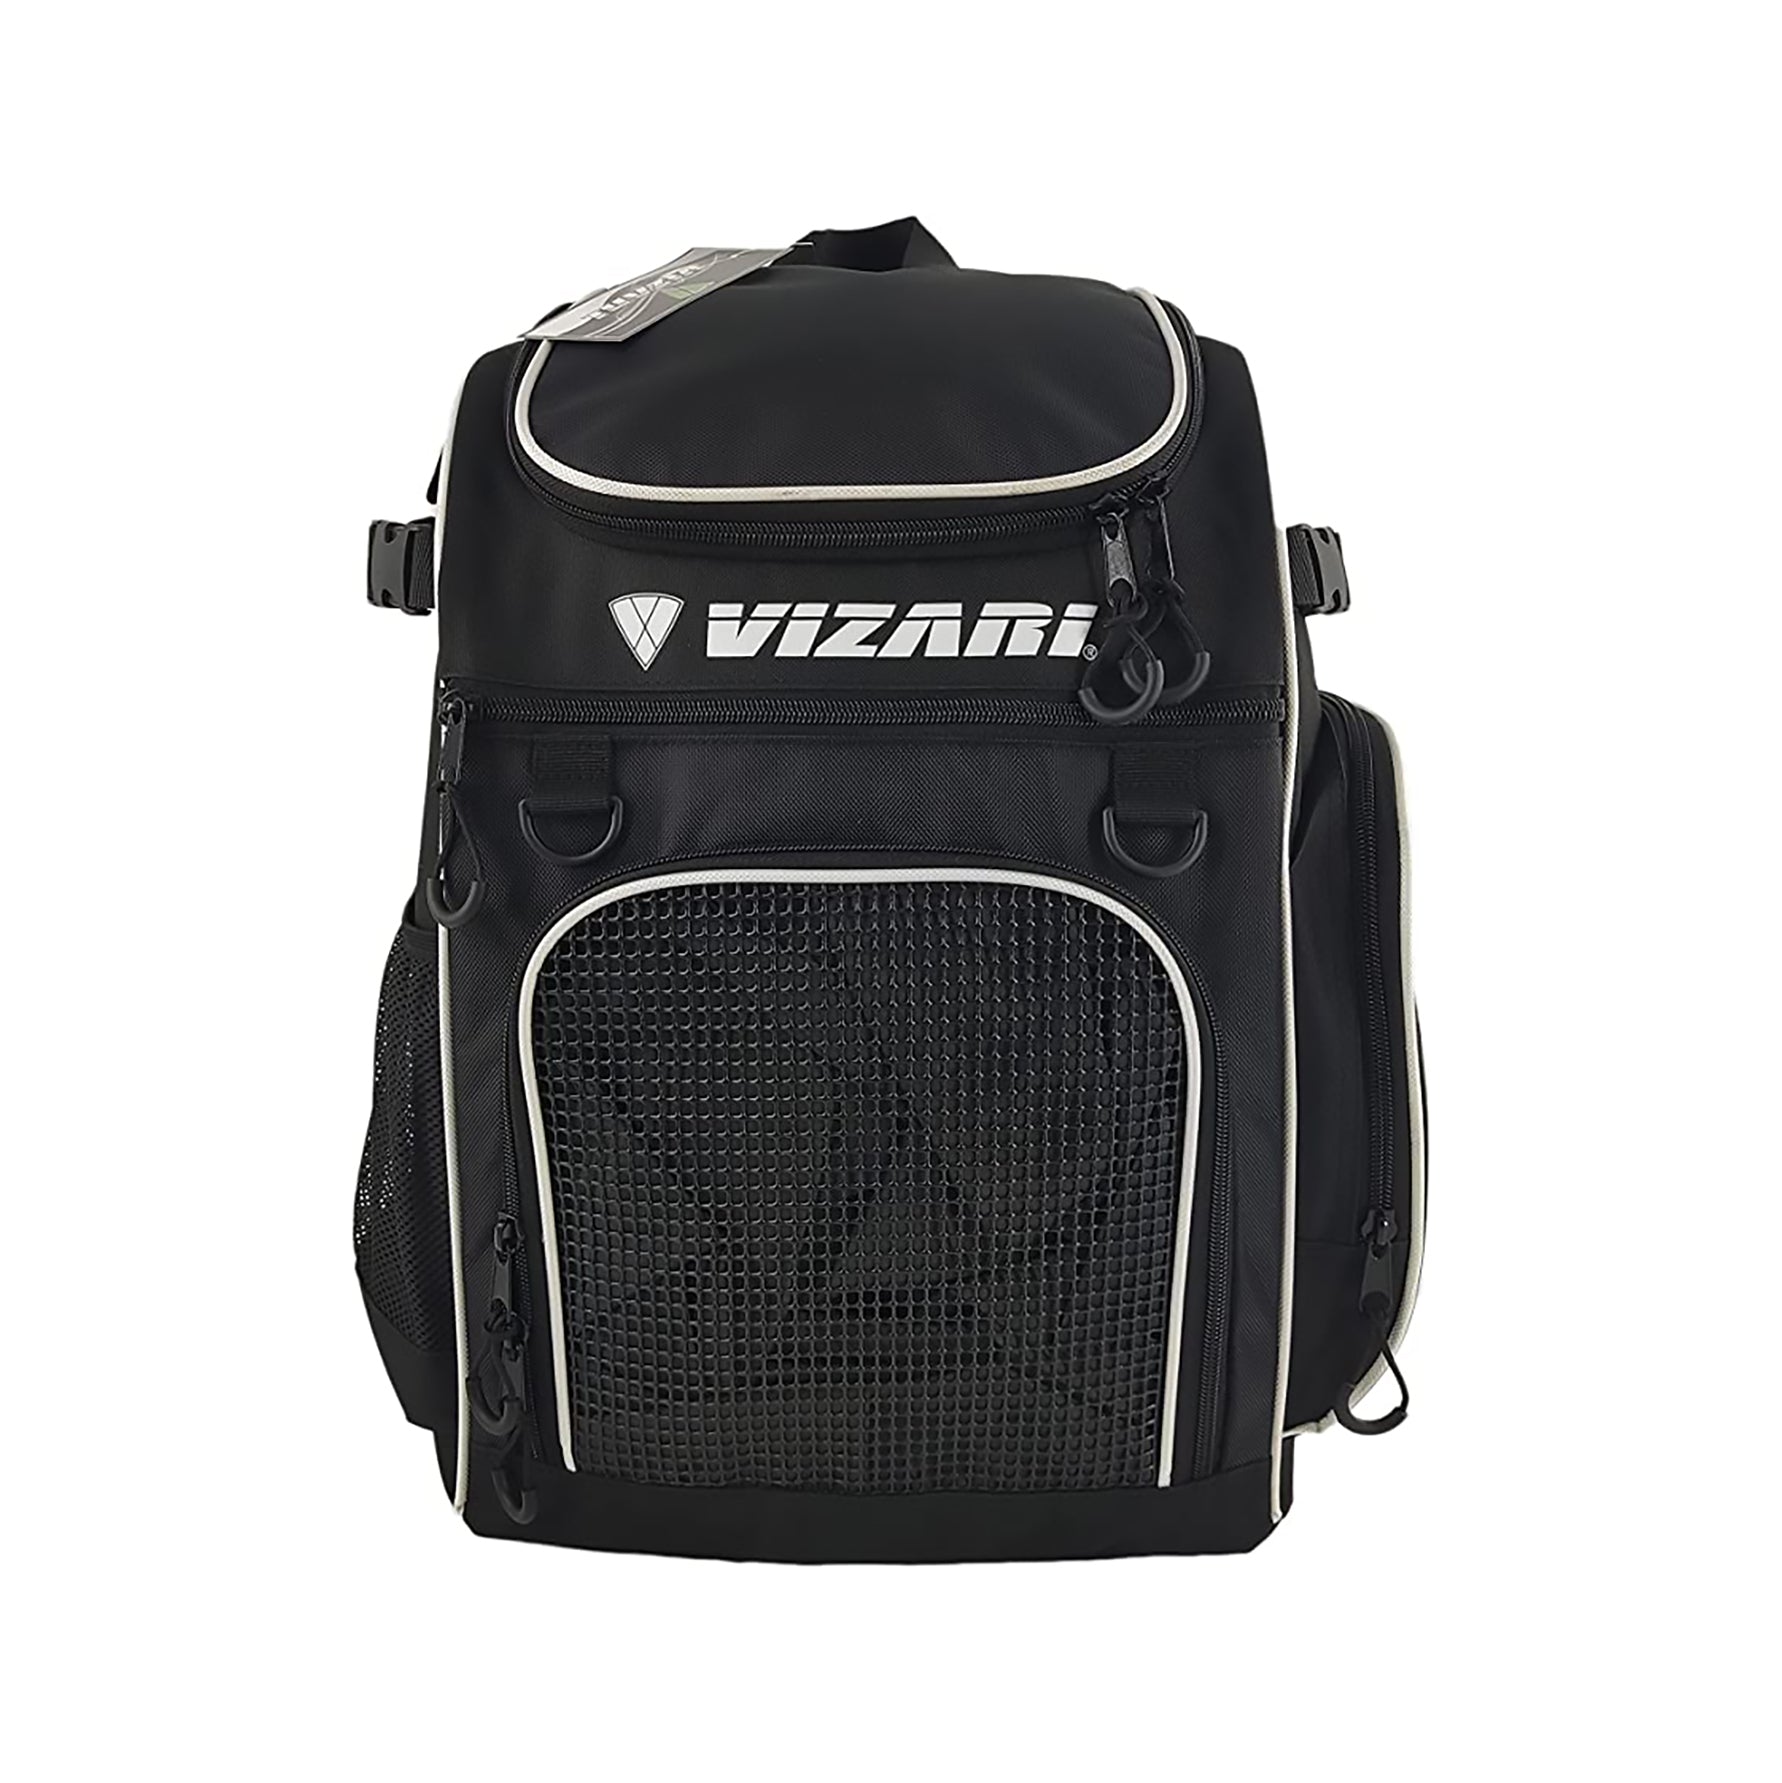 Cambria Soccer Backpack - Black/White